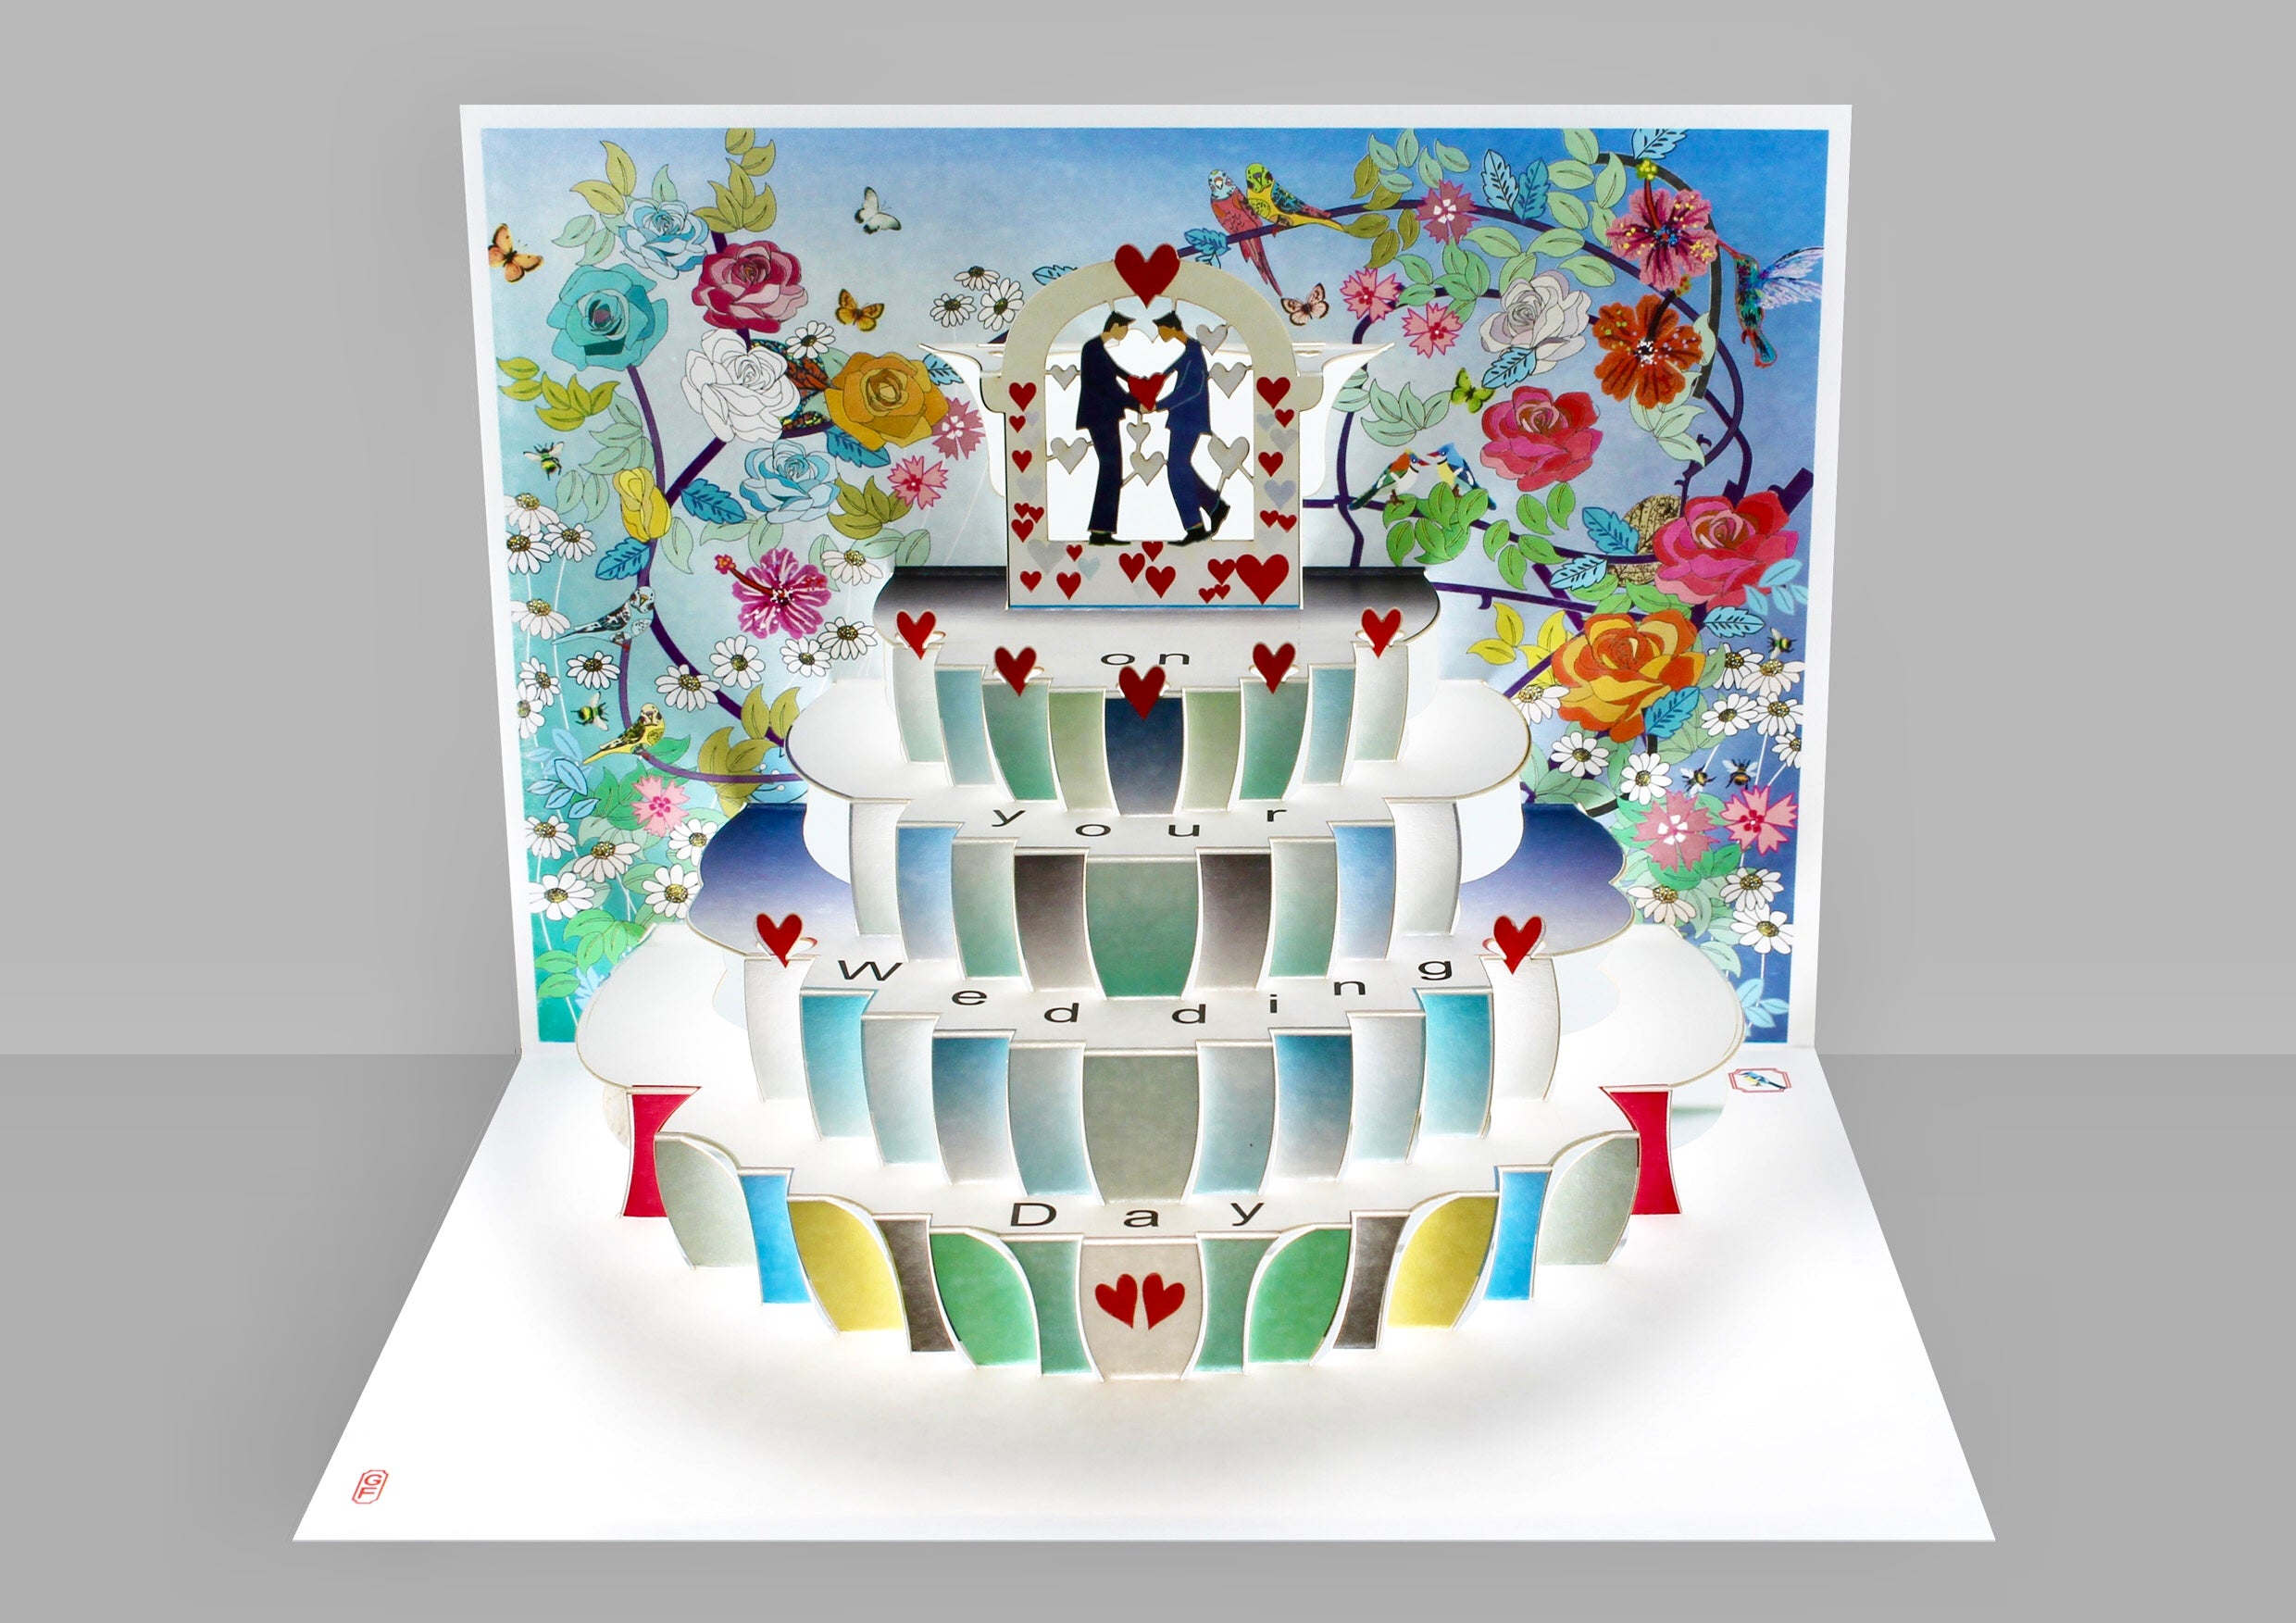 Male Gay On Your Wedding Day Floral 3D Pop Up Wedding Cake Special Day Greeting Card LGBT